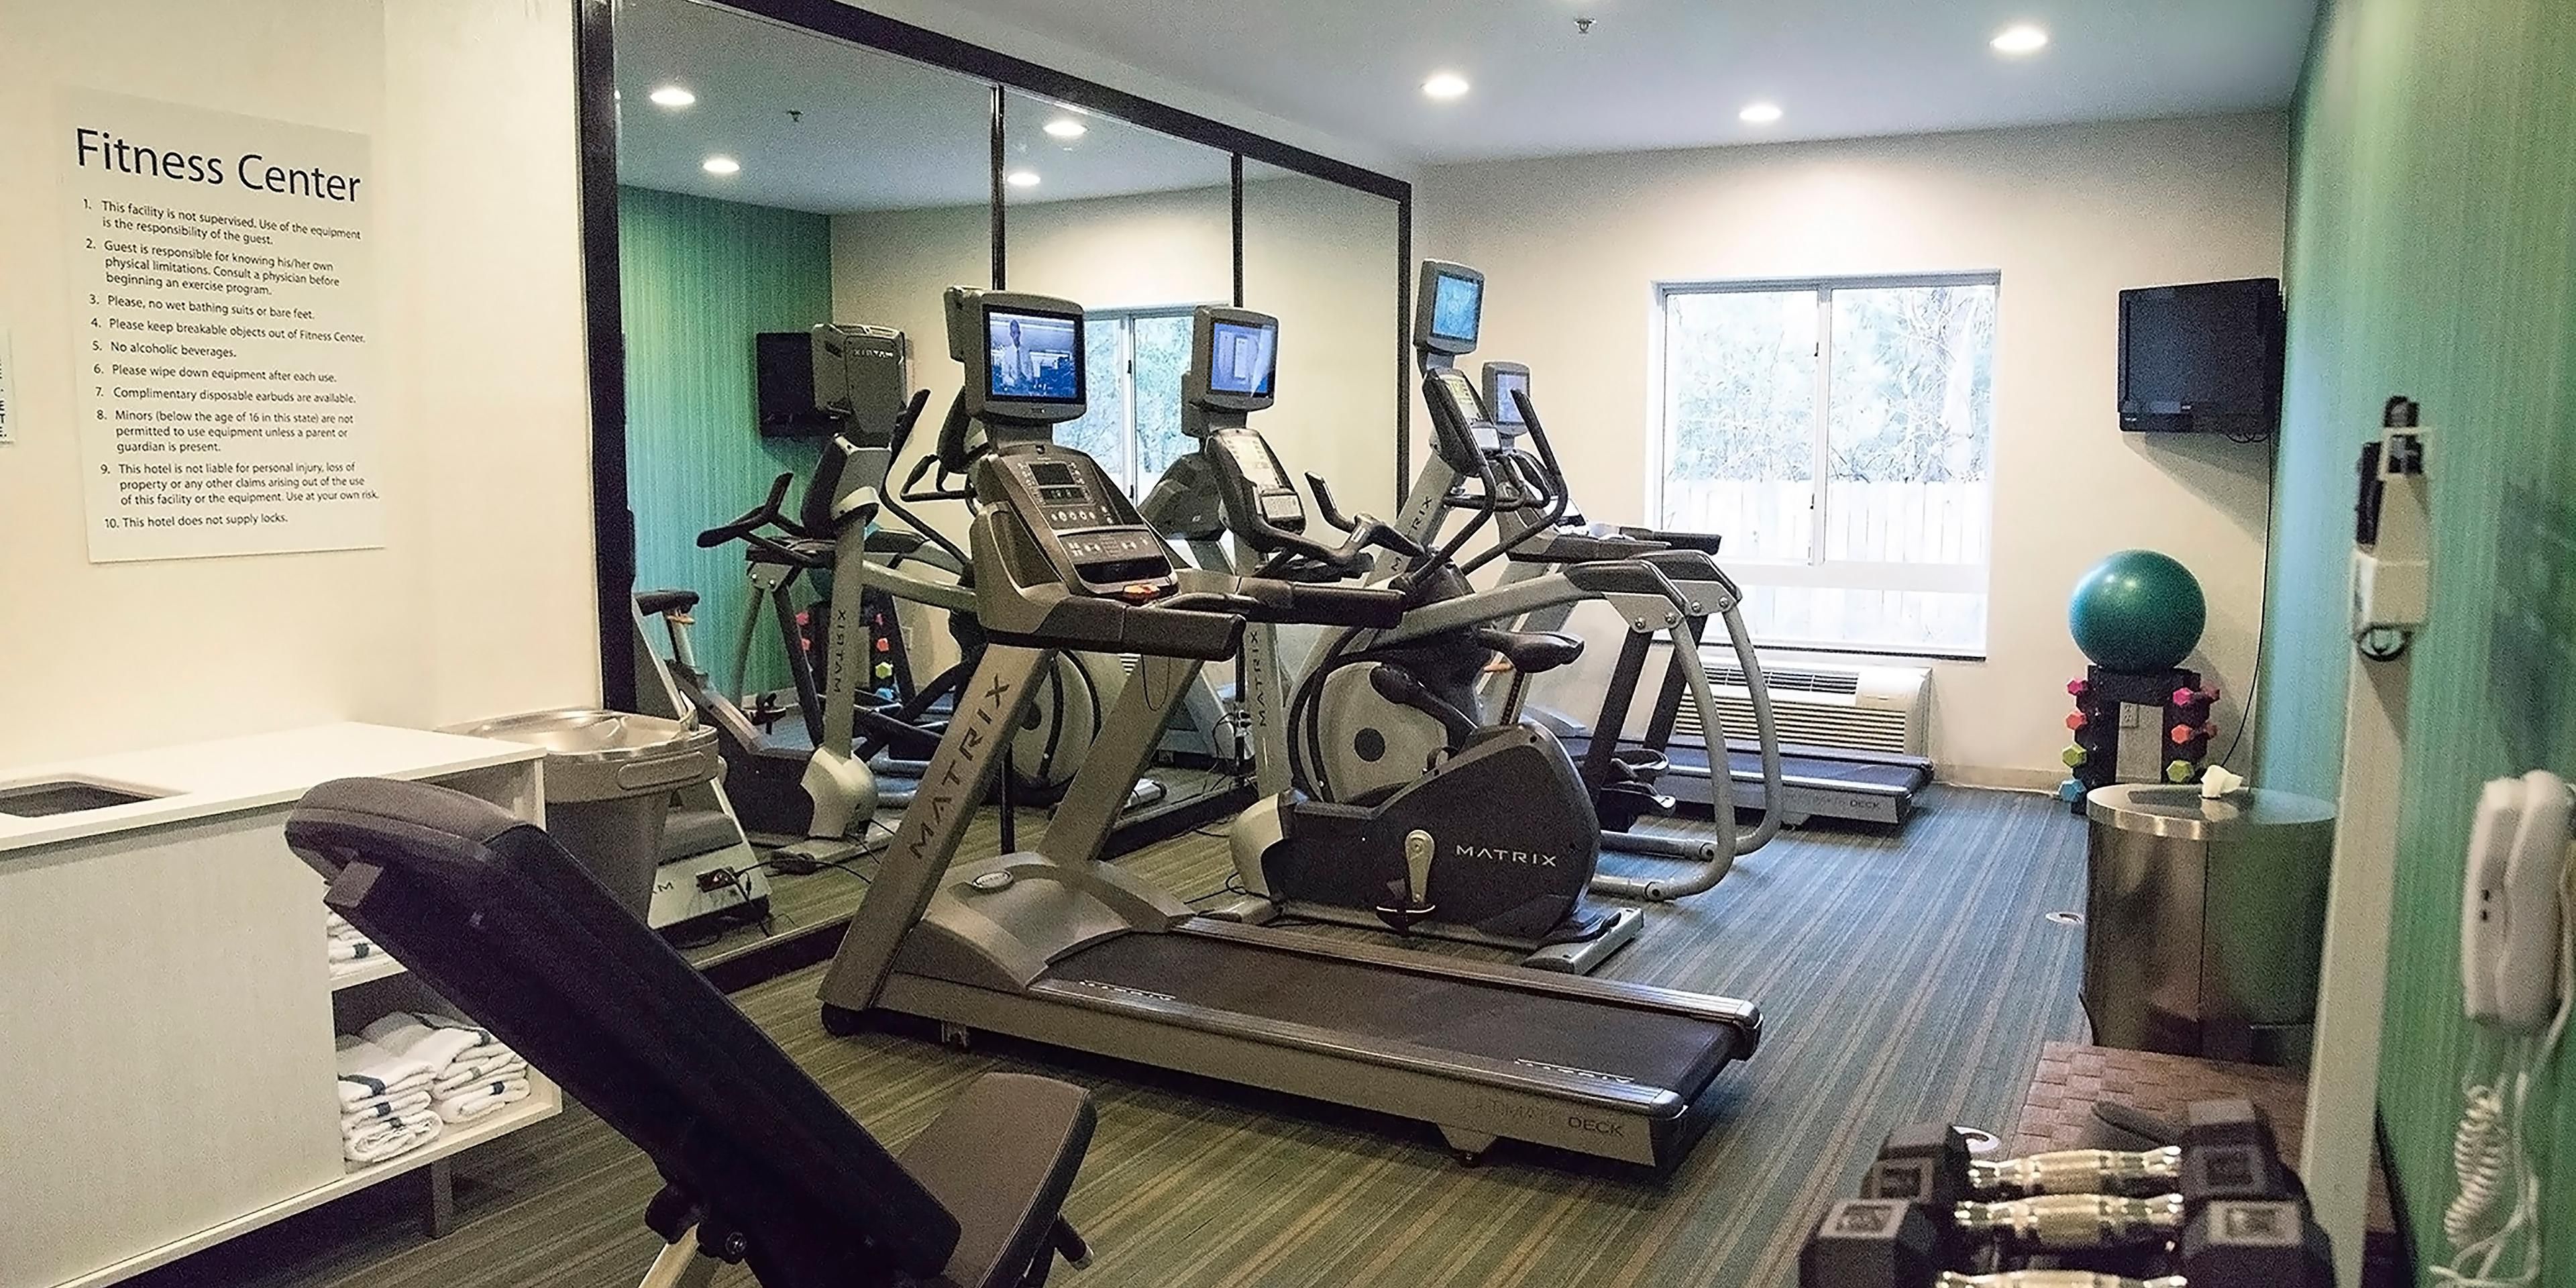 Our overnight guests can take advantage of our 24 Hour Fitness Center complete with free weights, exercise balls, tandem bikes, ellipticals and treadmills.